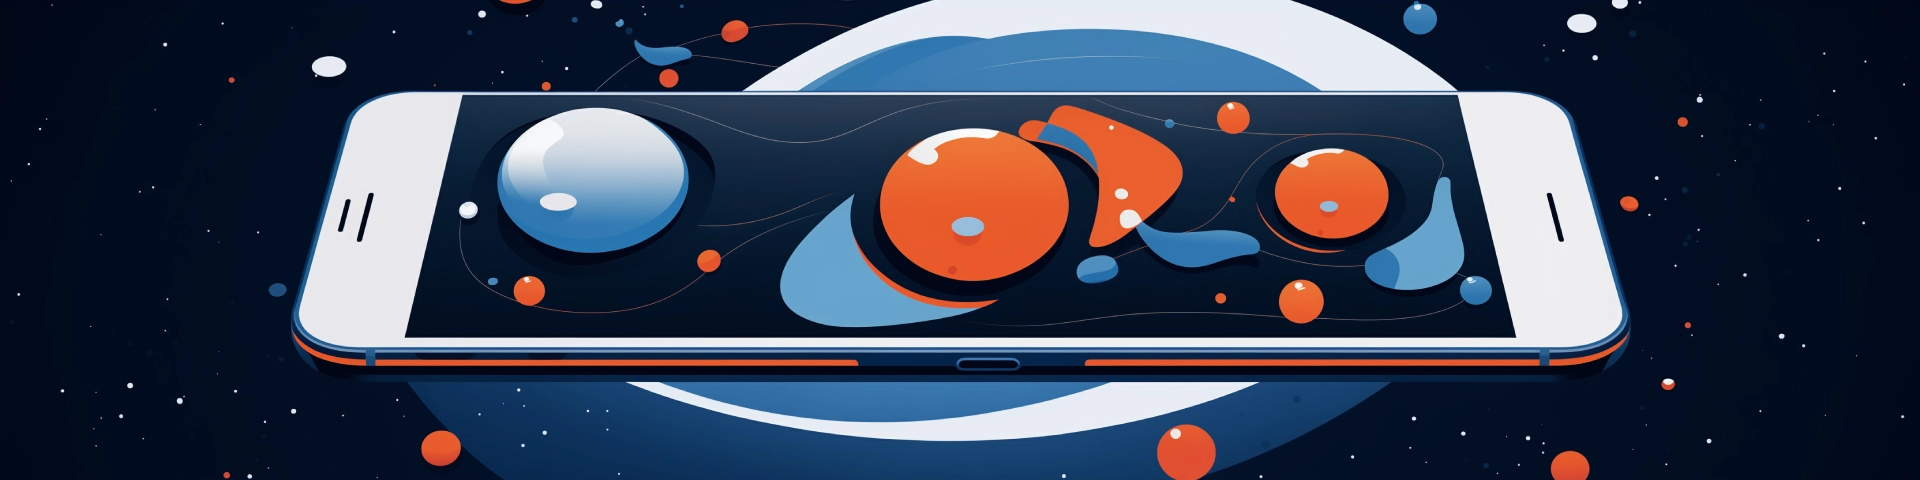 Smartphone in space cartoon style